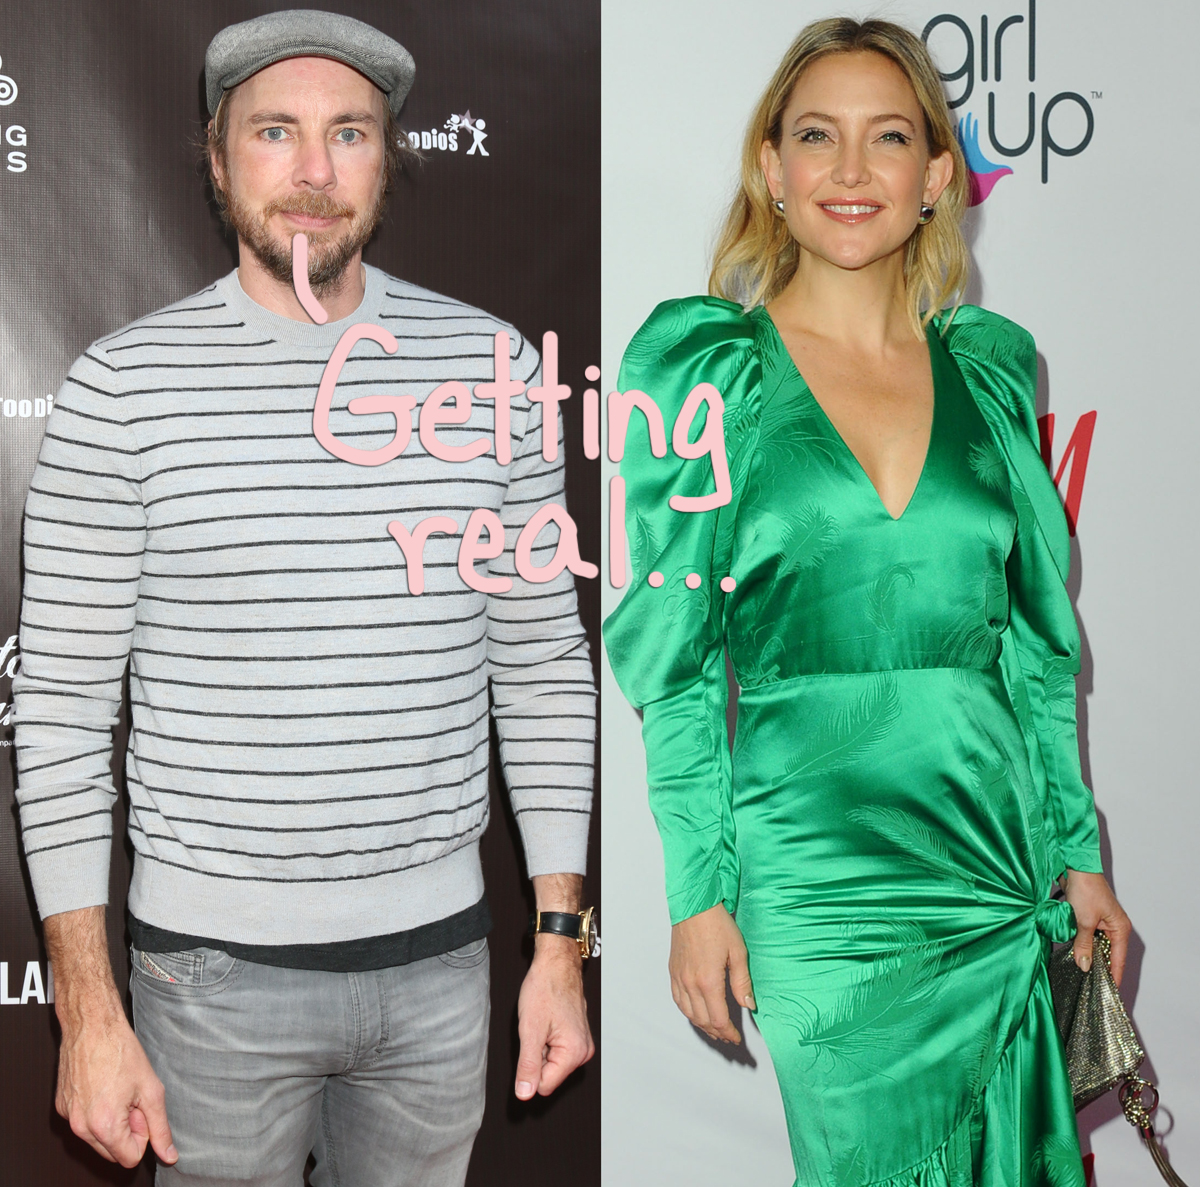 Dax Shepard Opens Up About Going Through Rough Period While Dating Kate Hudson In 2007 Perez